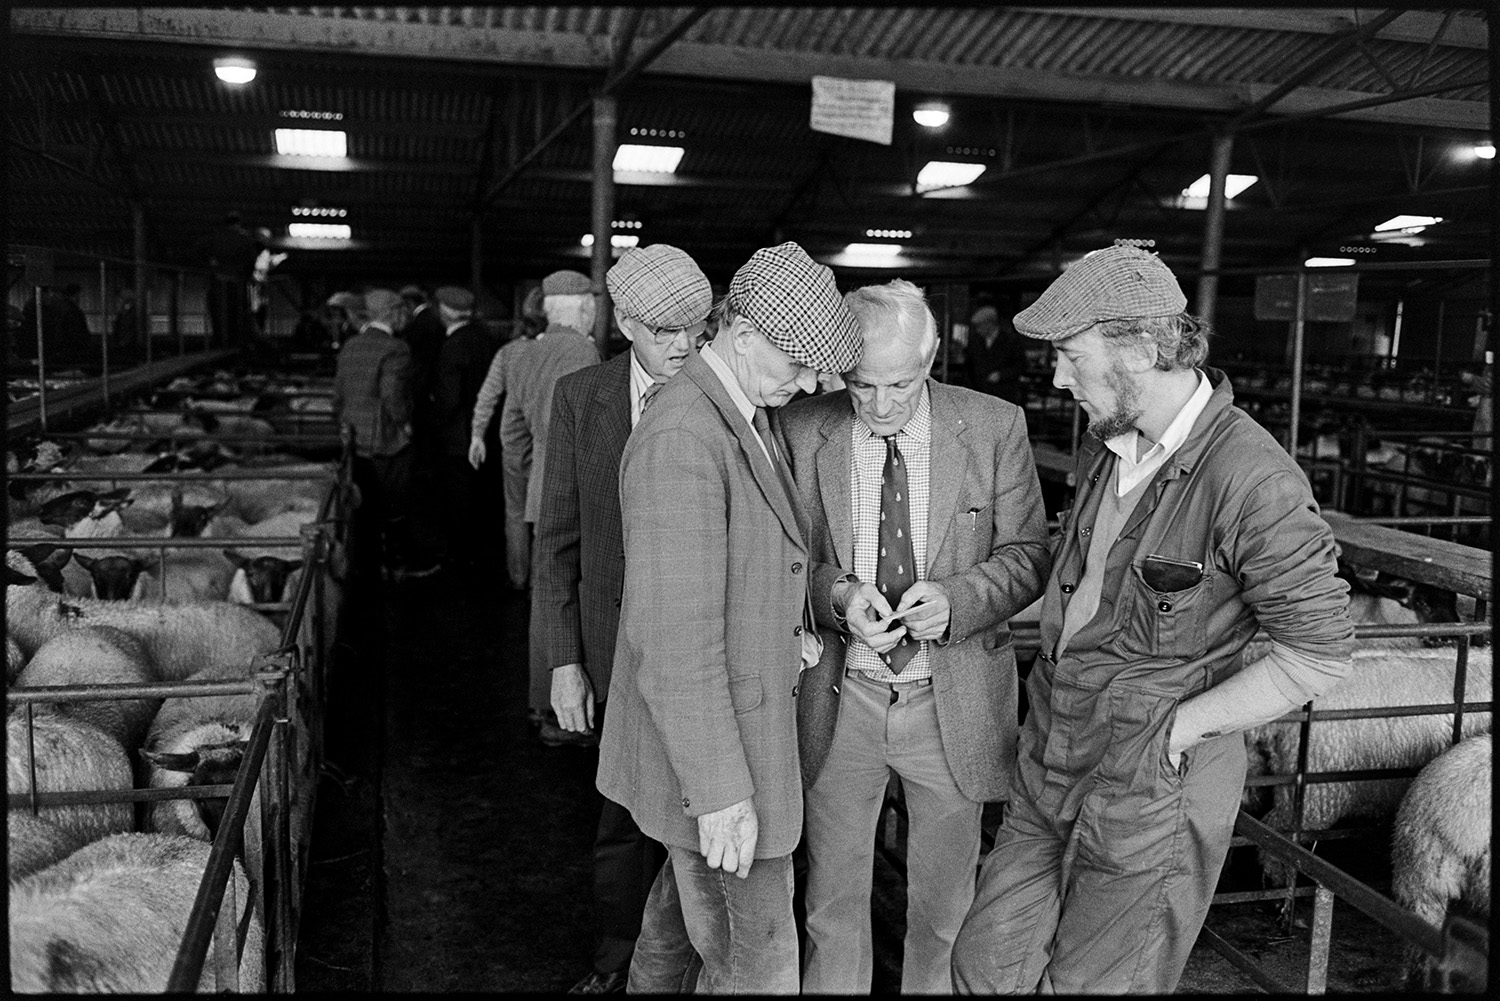 Farmers at market. 
[Four men stood by sheep pens at Holsworthy Market. One of the men is showing a card to the others.]